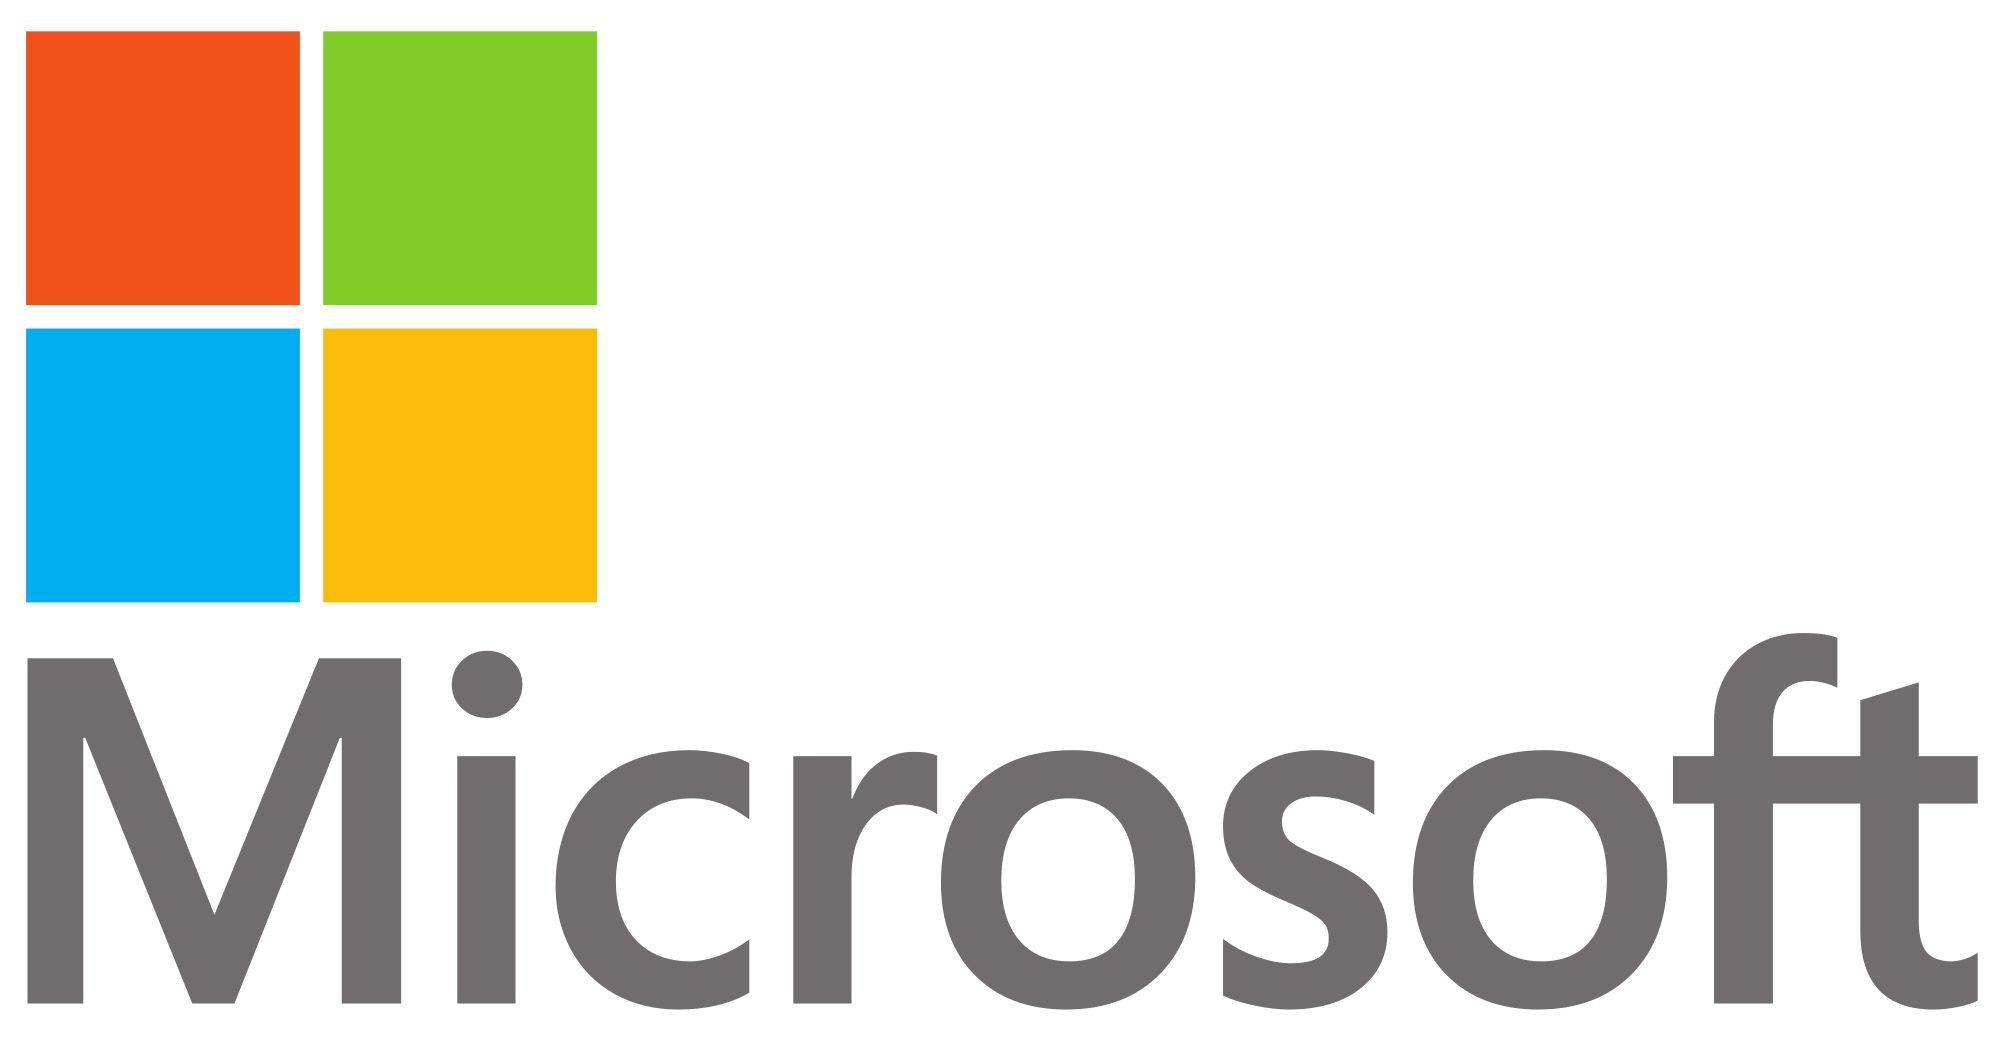 Microsoft Company Logo - Microsoft Logo, Microsoft Symbol, Meaning, History and Evolution